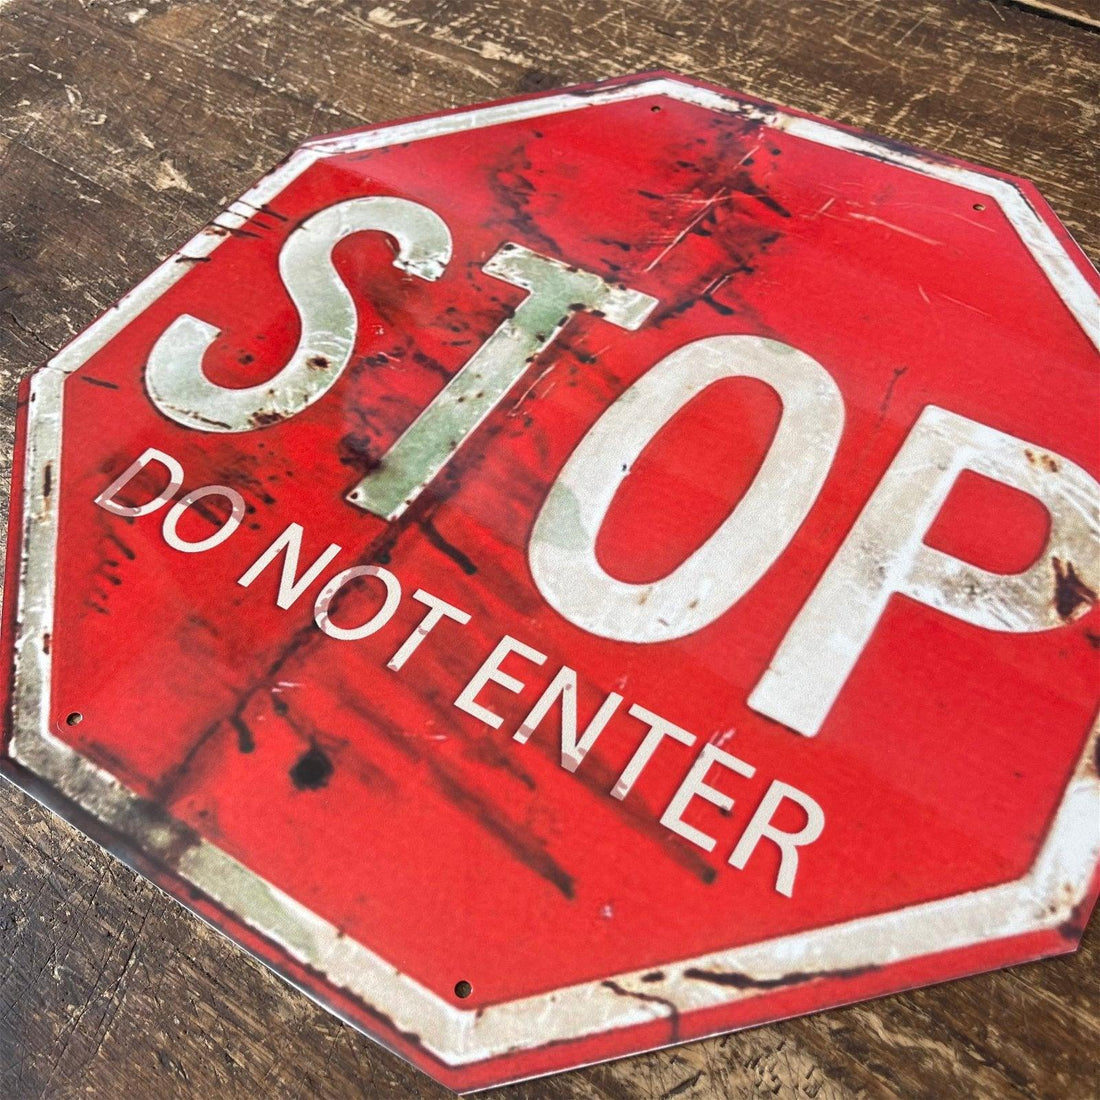 Vintage Metal Sign - Stop, Do Not Enter Sign - £24.99 - Signs & Rules 